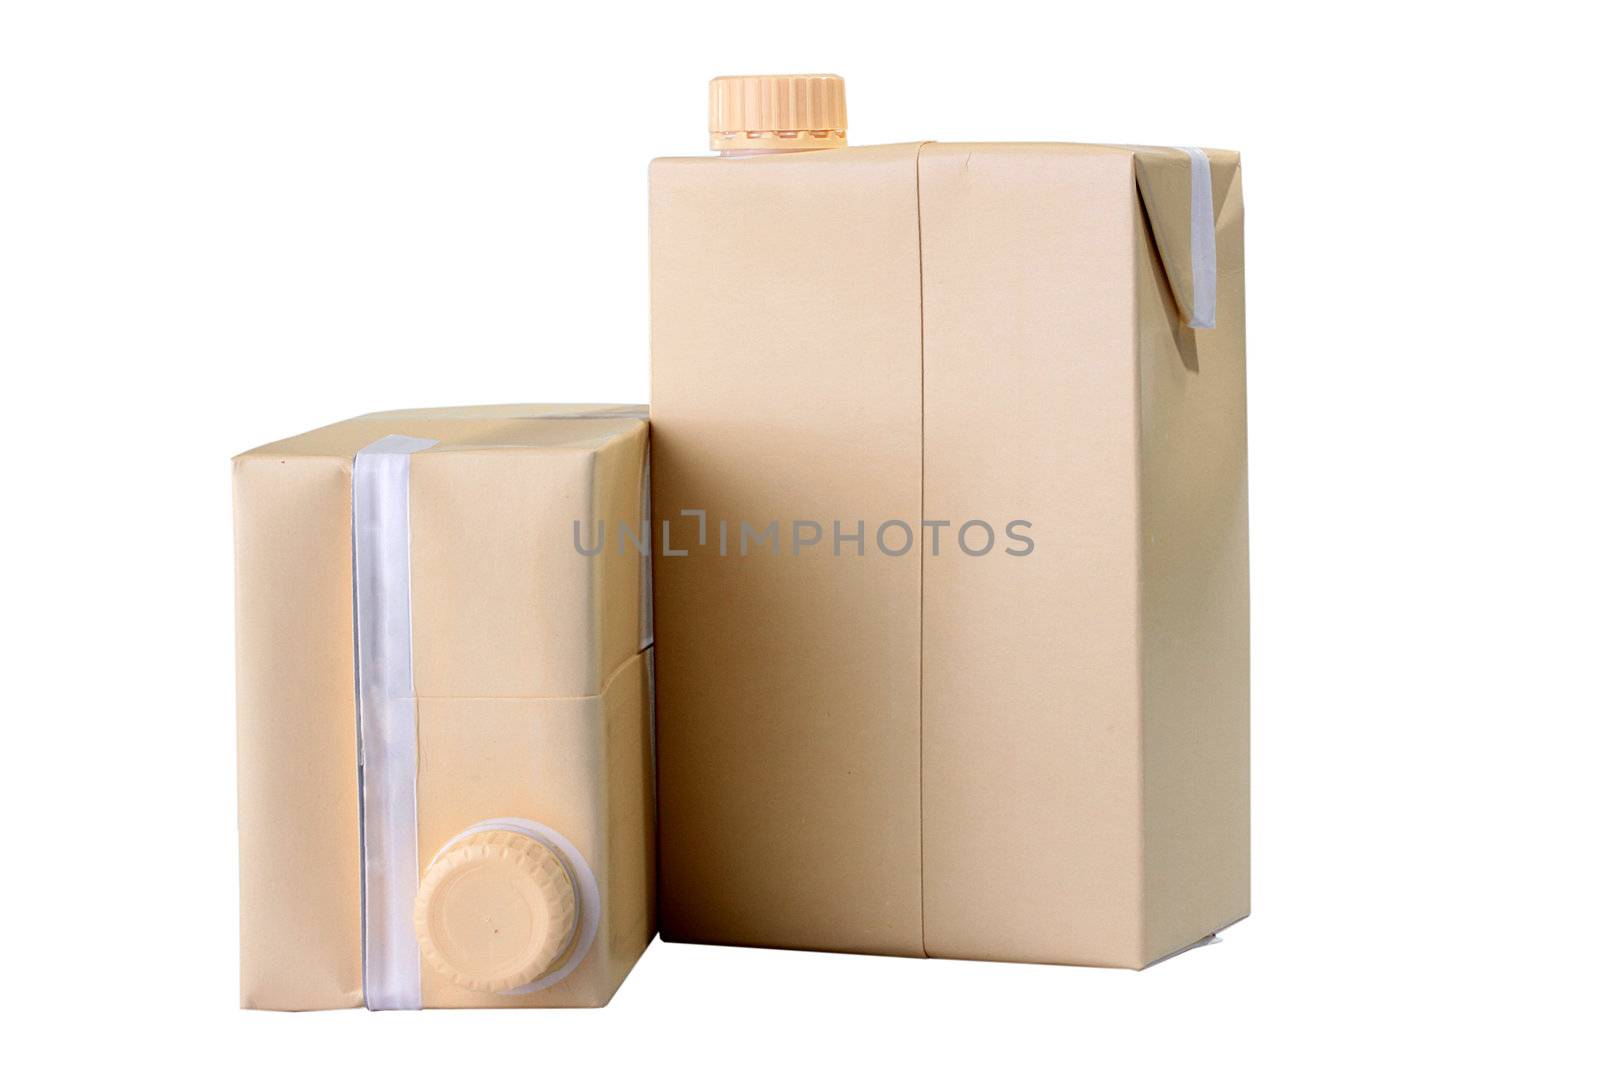 Two cardboard containers for juice or milk with plastic covers.